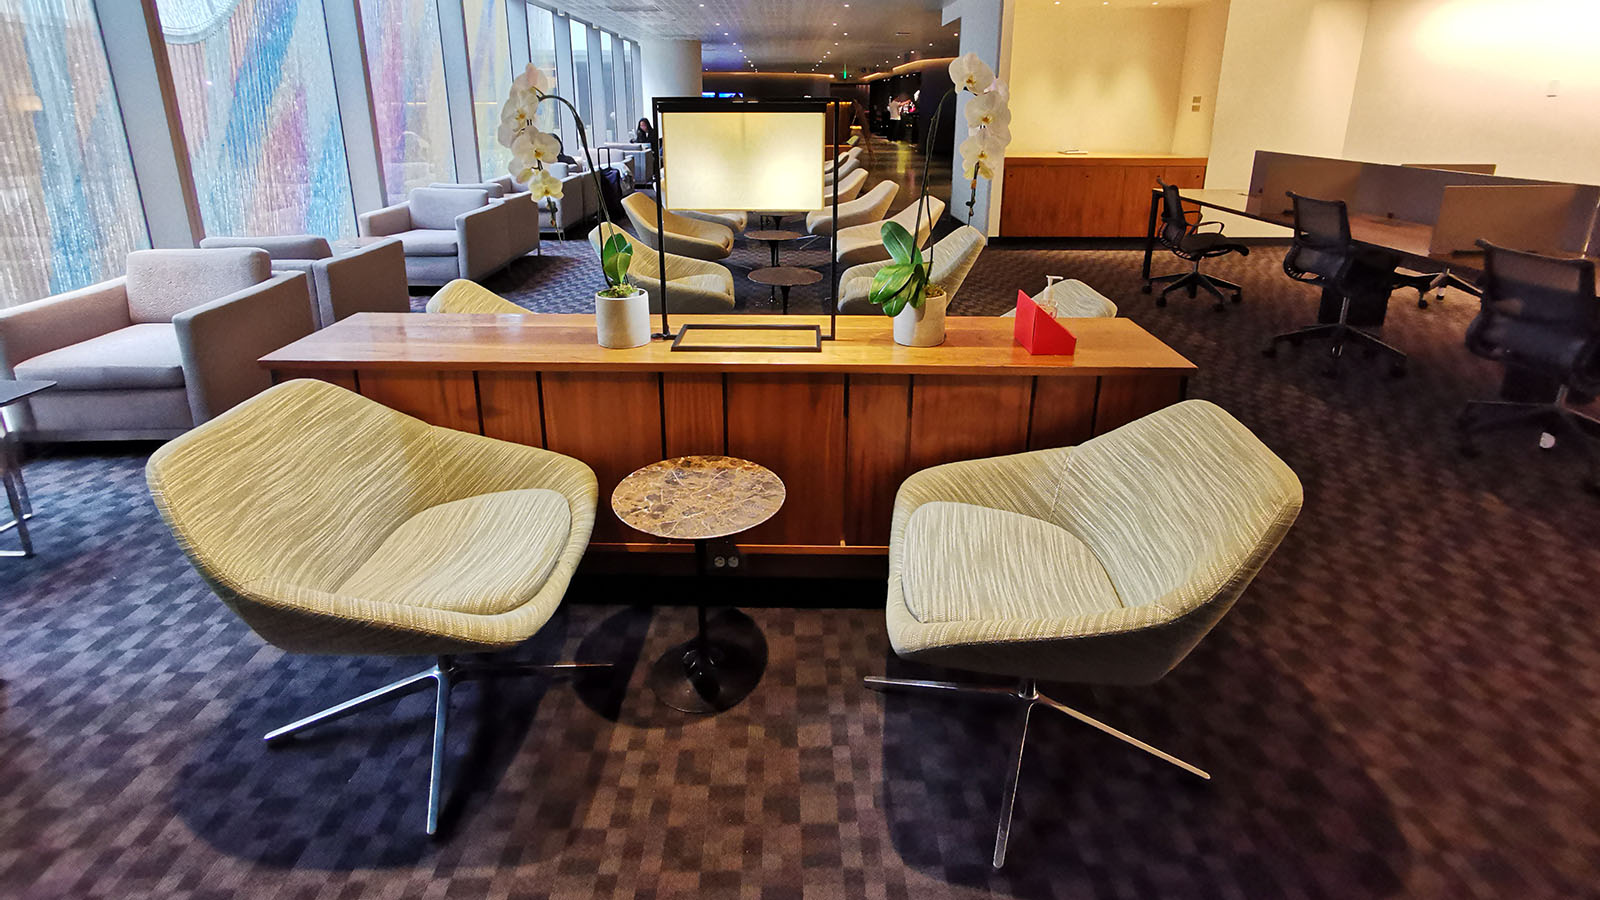 Seats in the Qantas International Business Lounge in Los Angeles